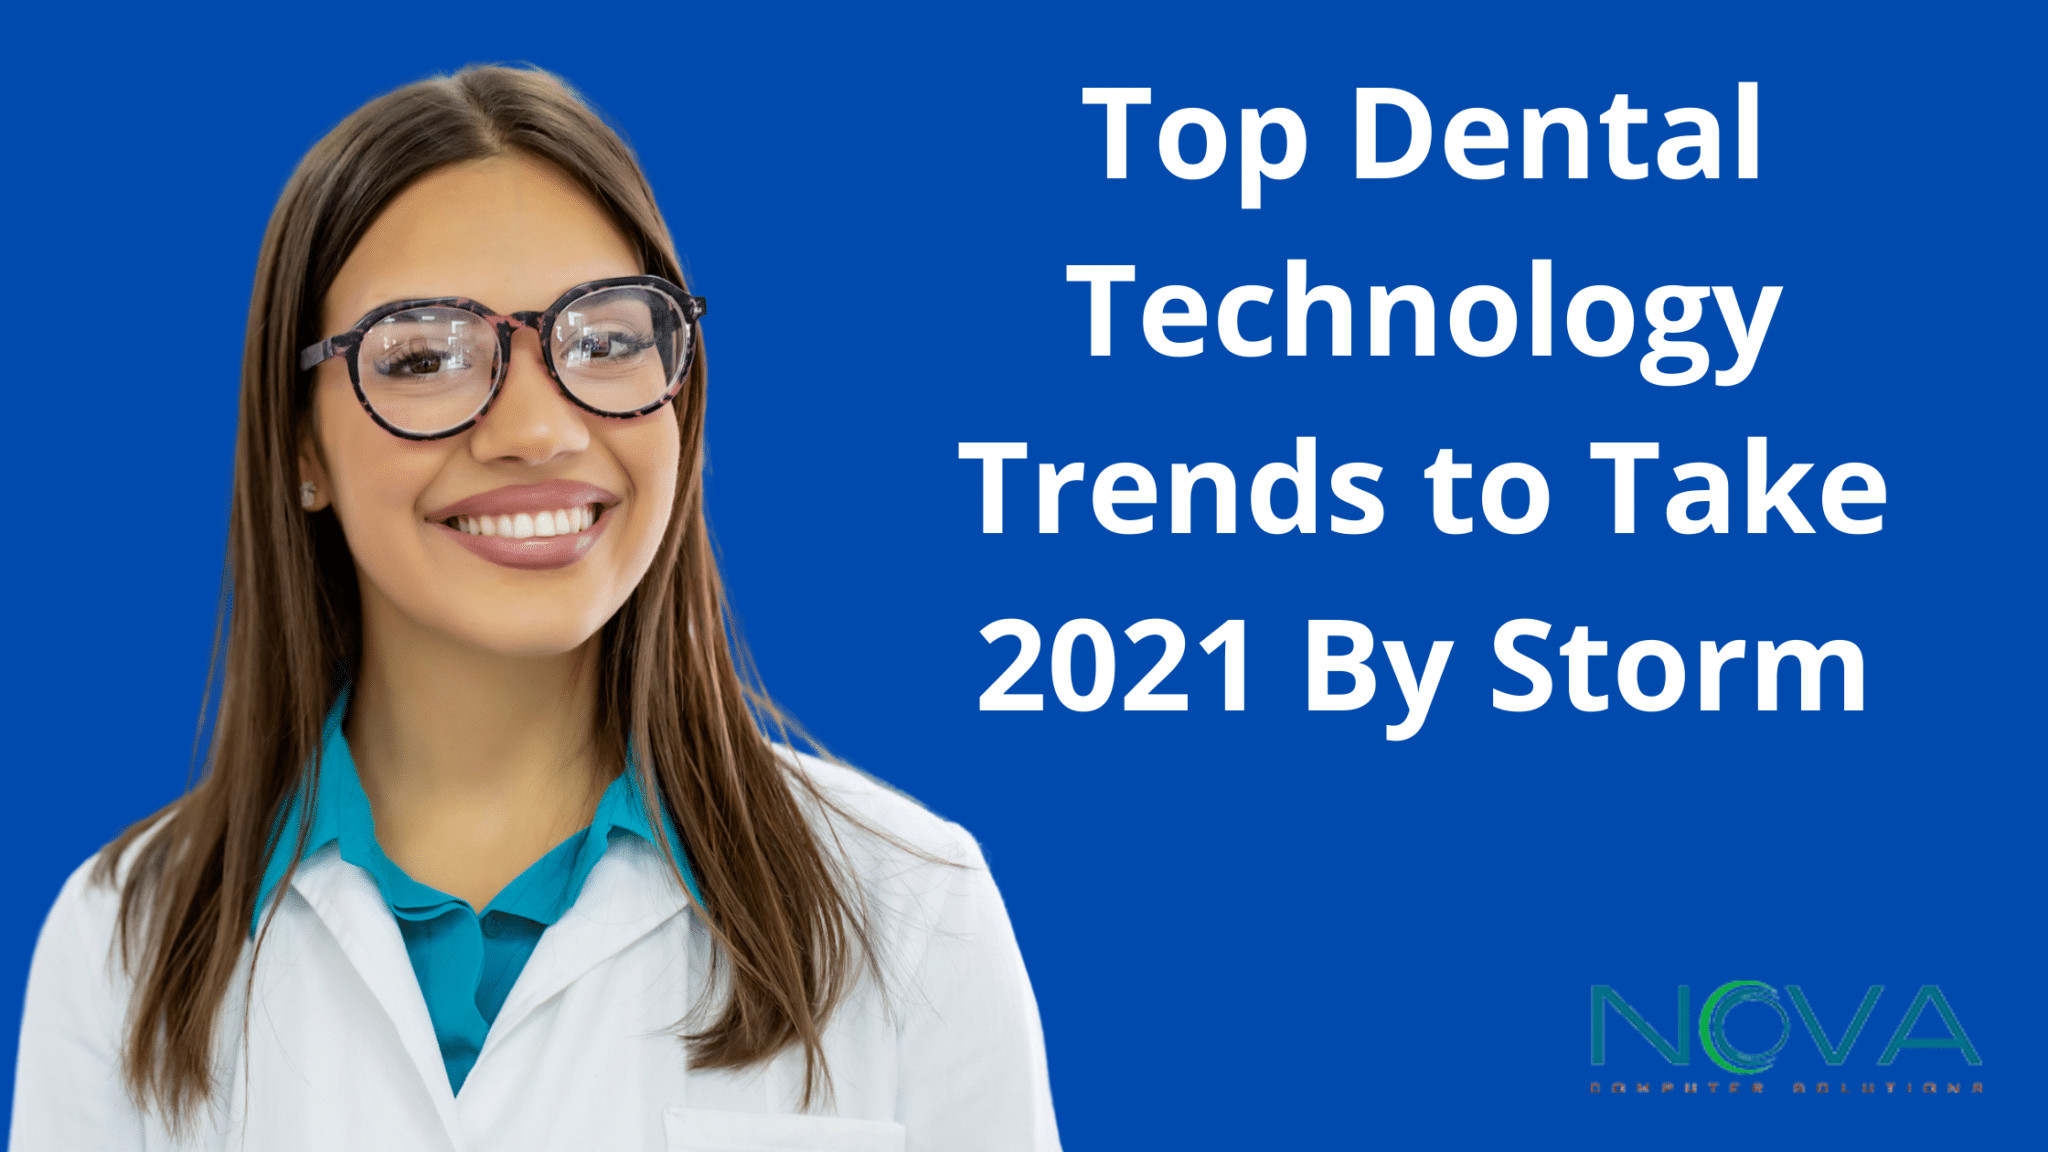 Top Dental Technology Trends to Take 2021 By Storm